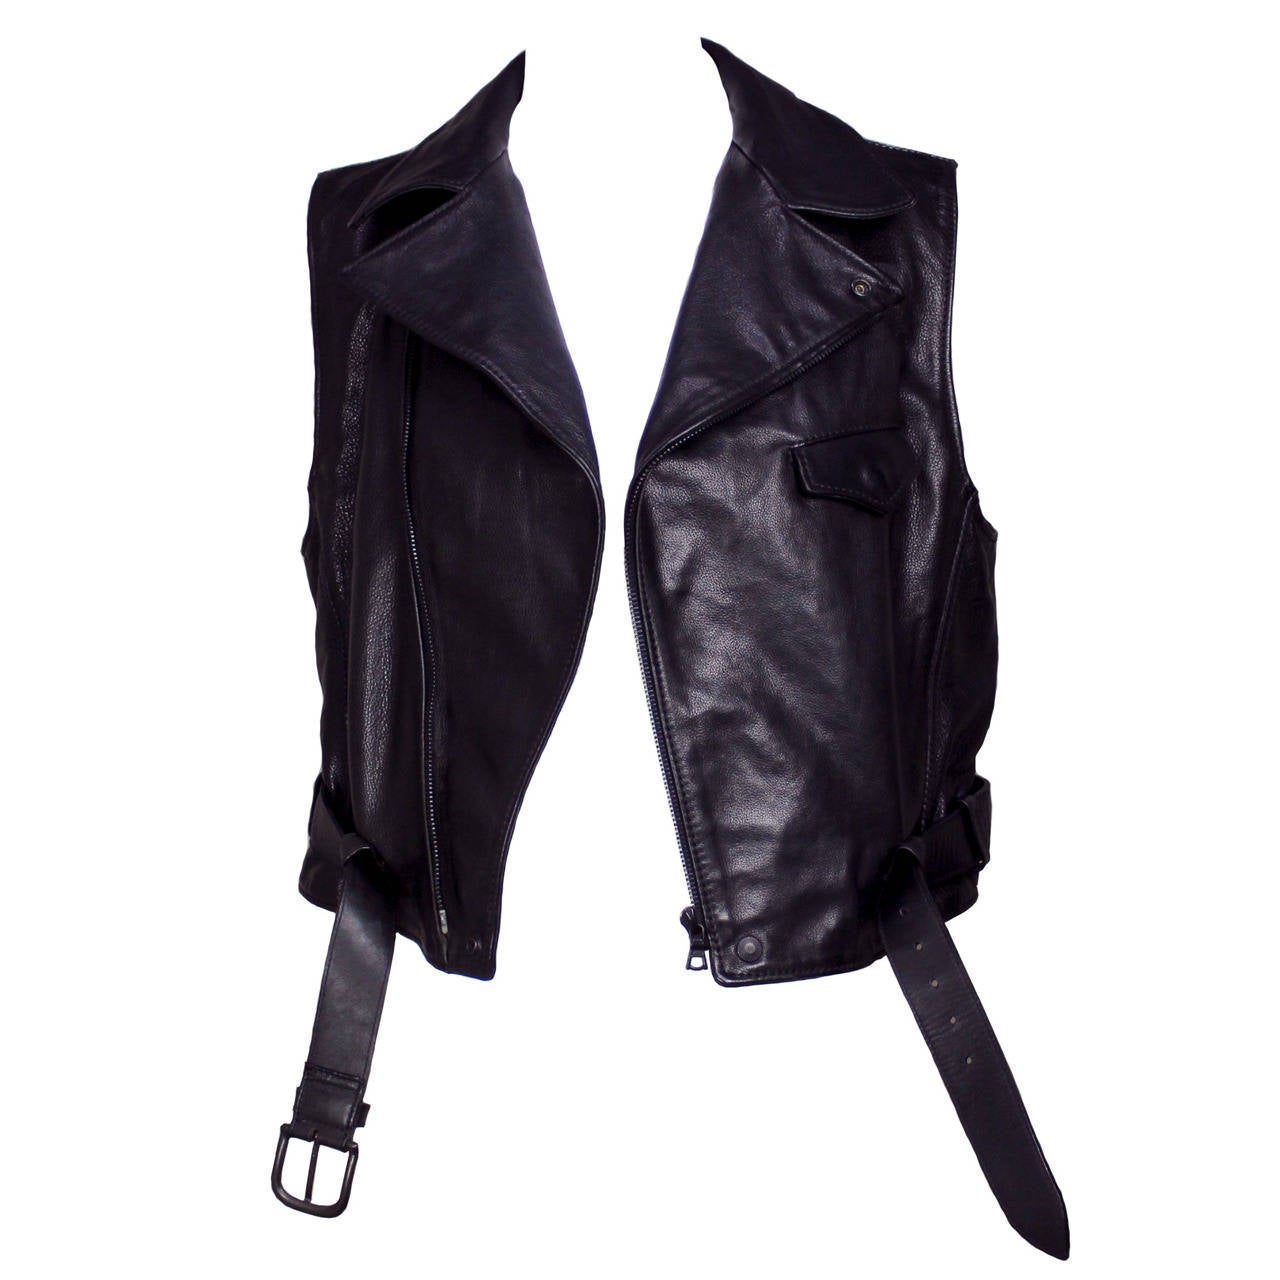 Ruffo Black Leather Motorcycle Vest For Sale